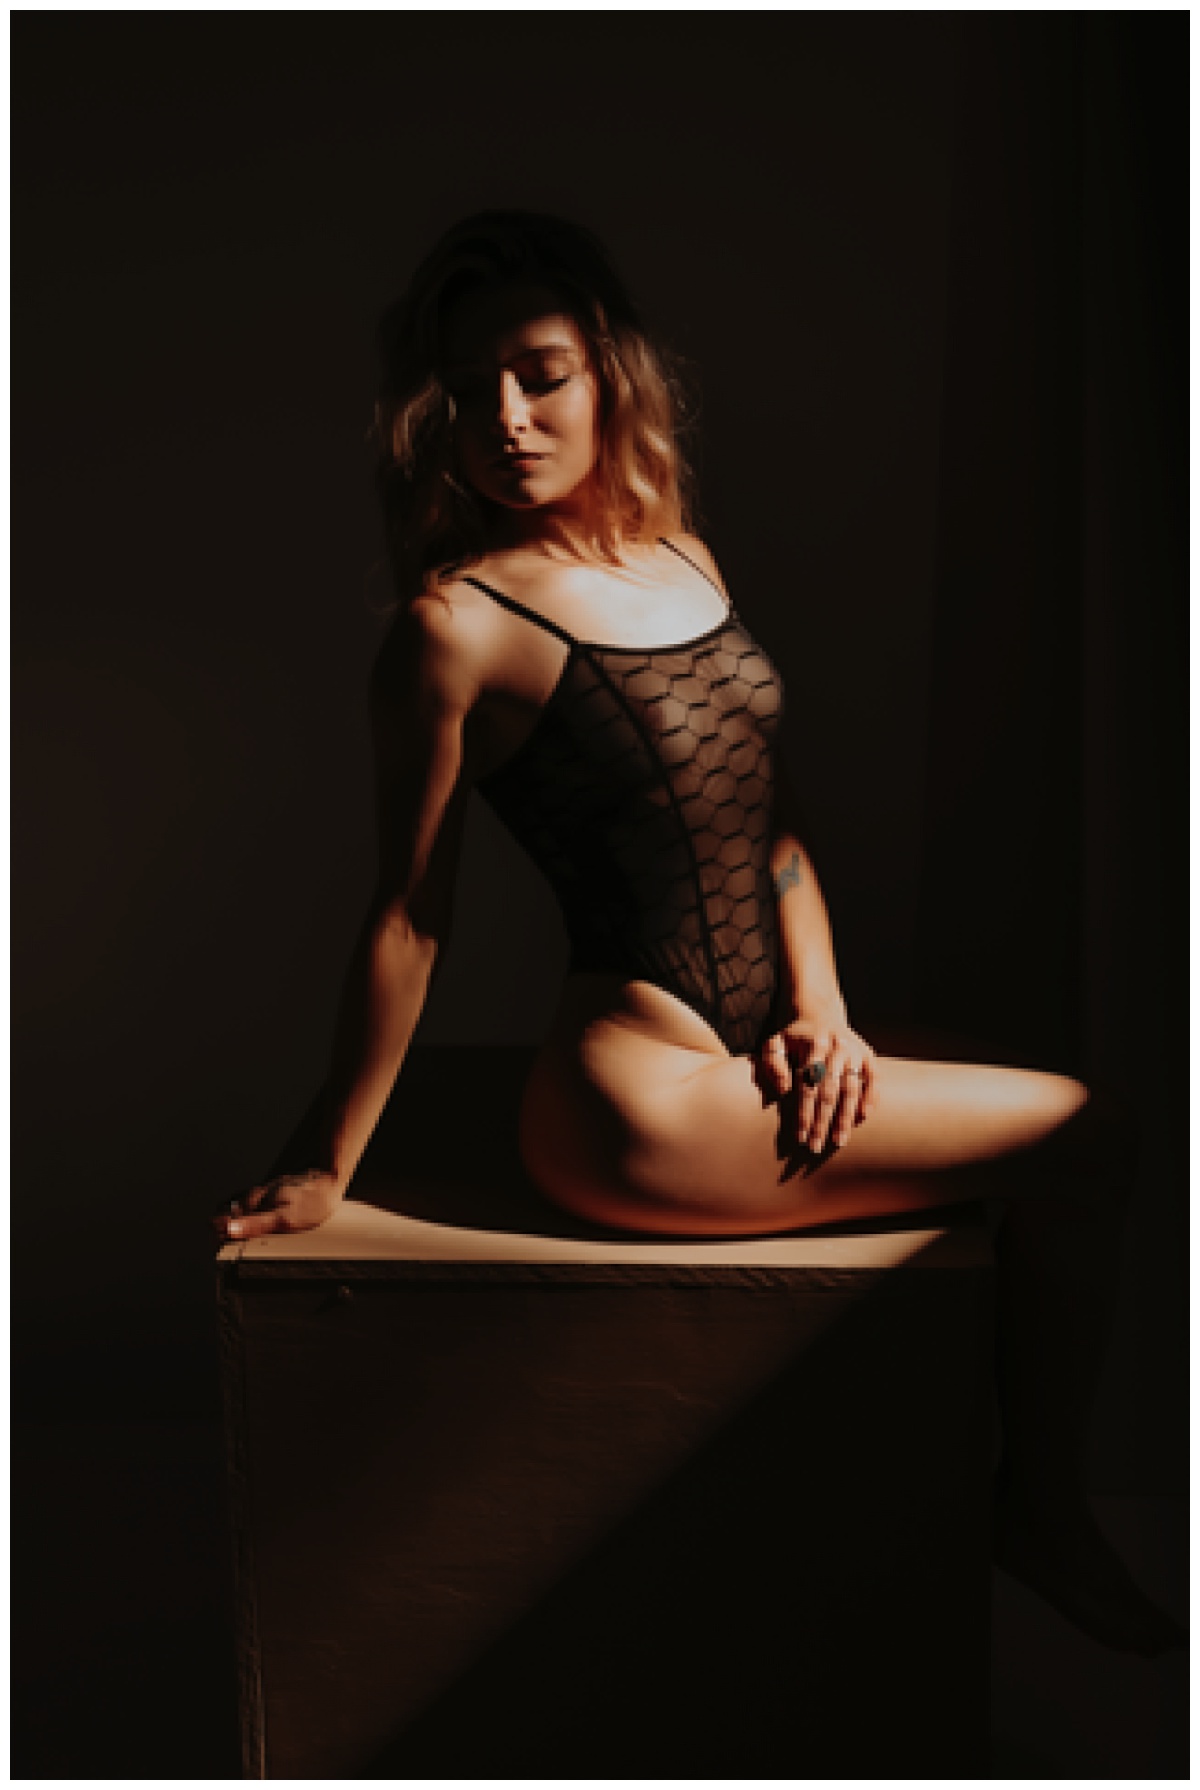 Female sits down wearing black lingerie bodysuit for Mary Castillo Photography